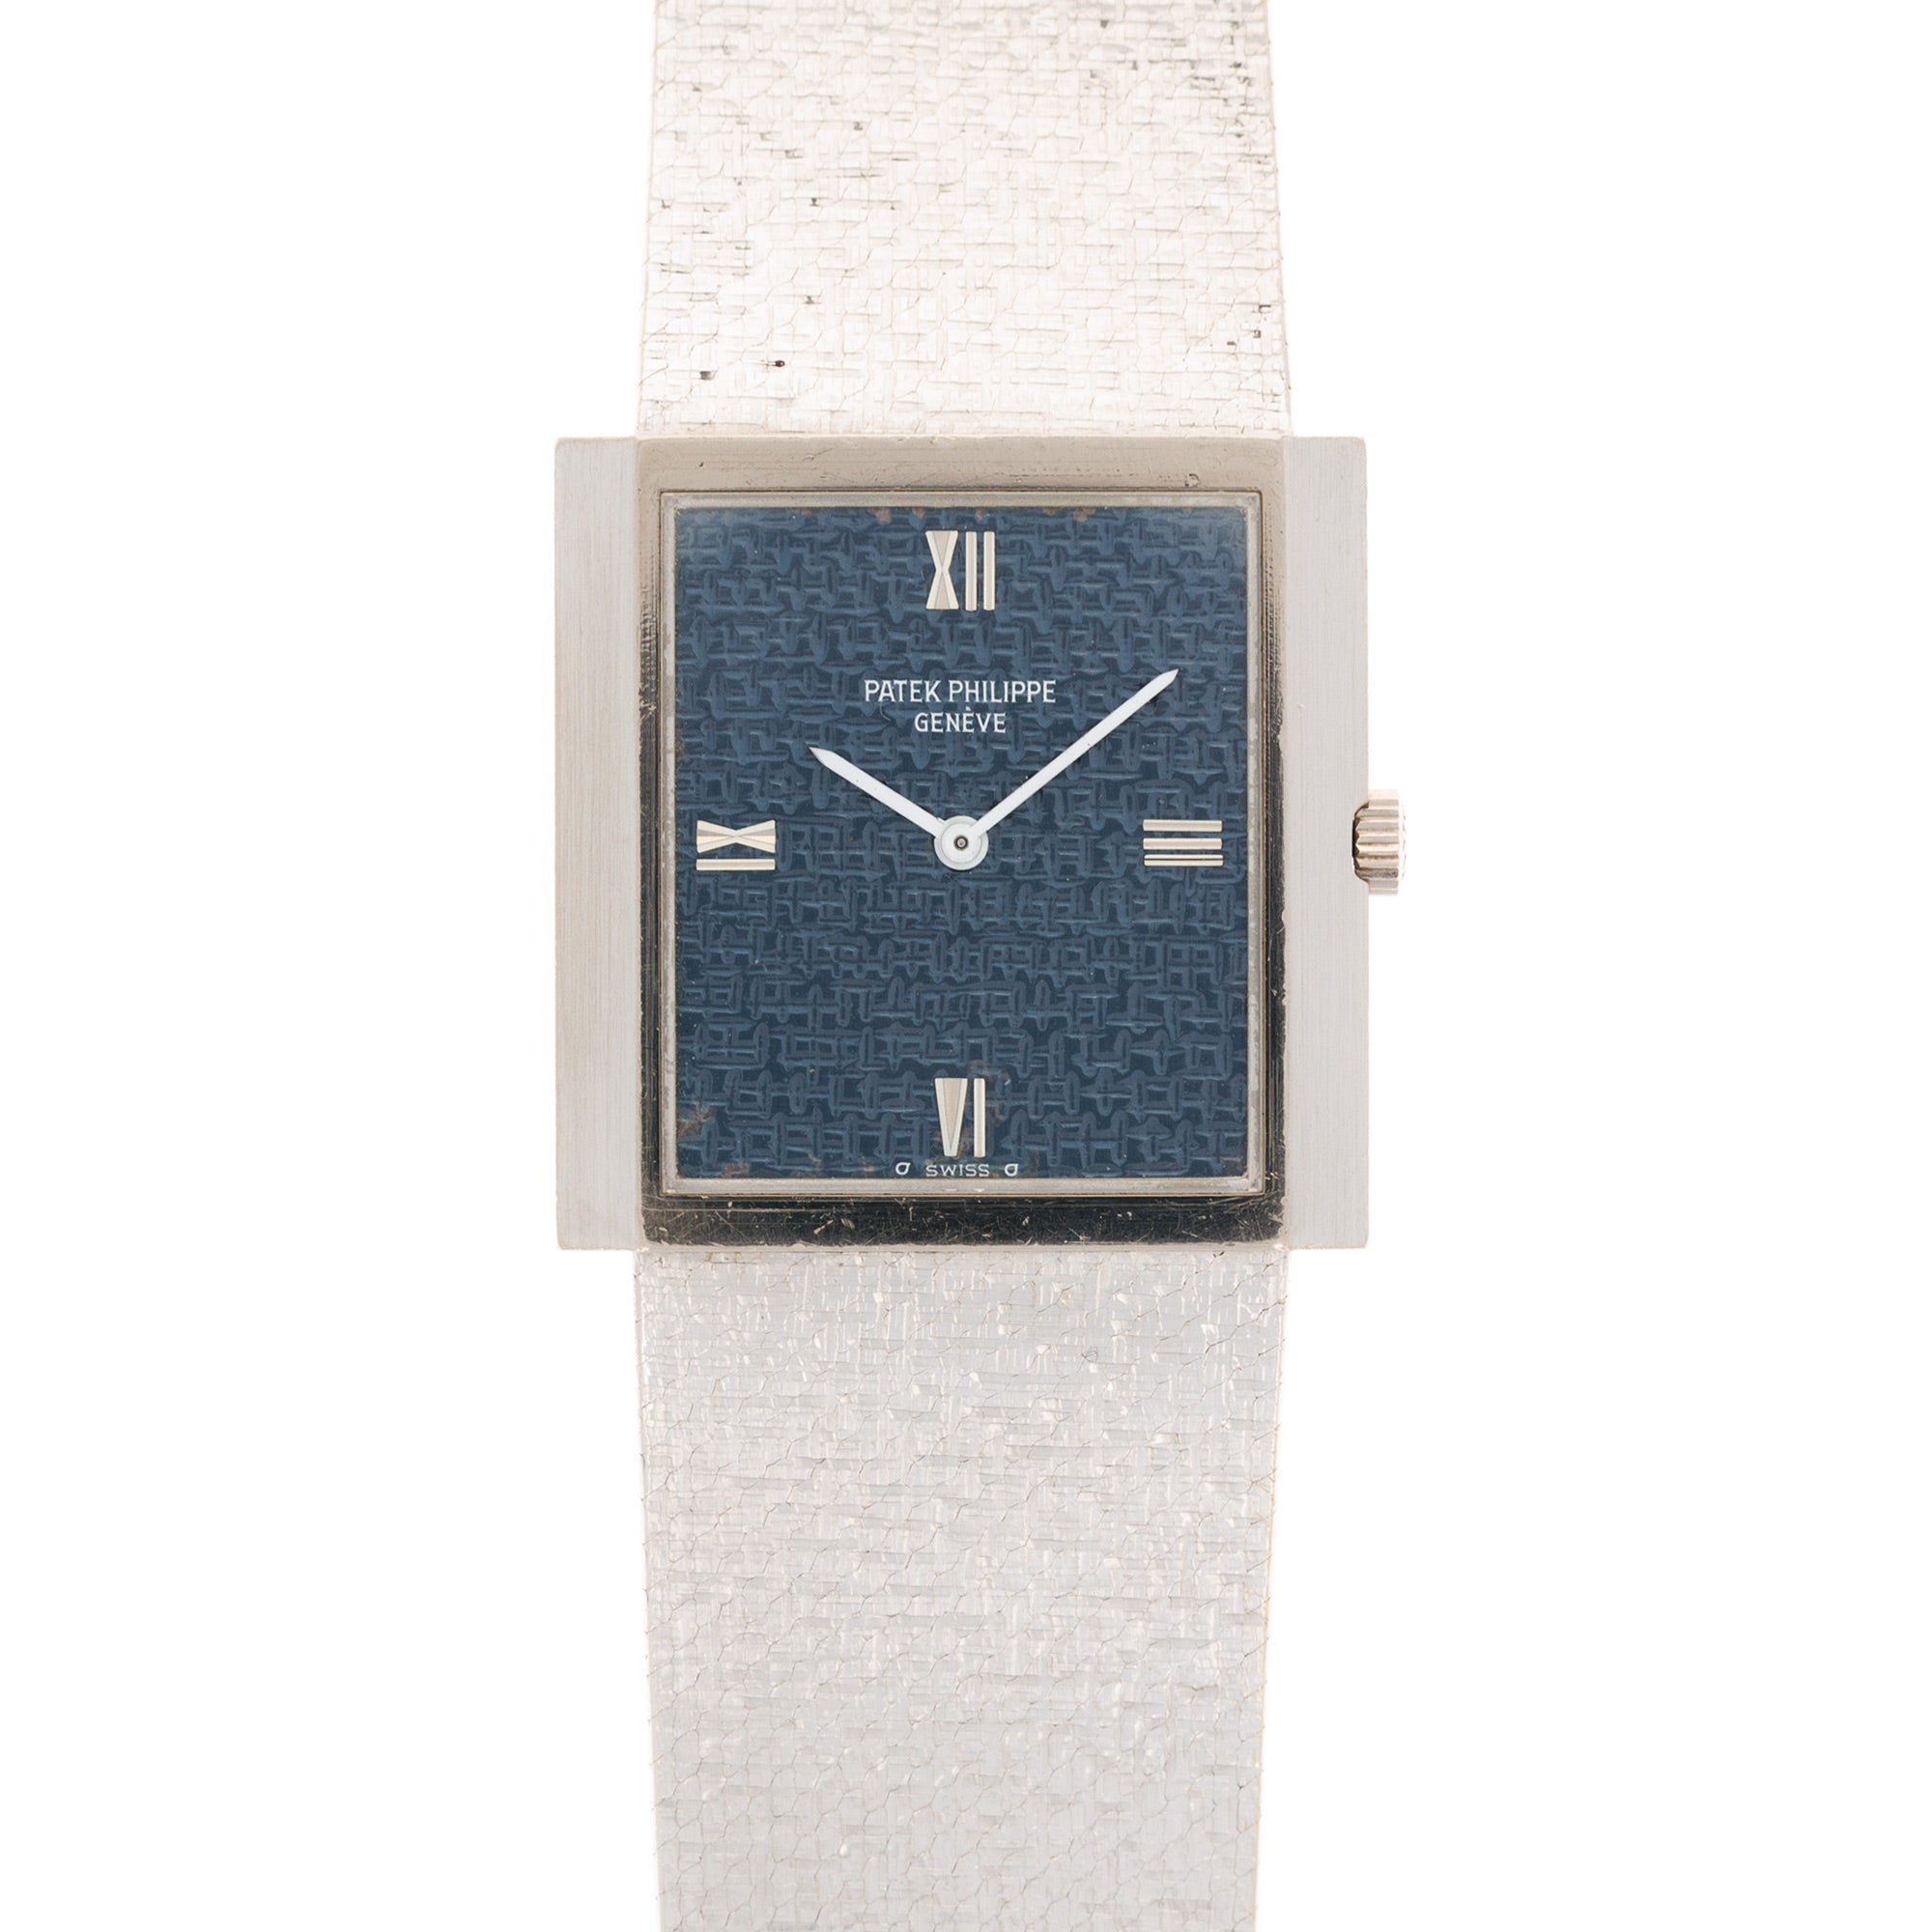 Patek Philippe - Patek Philippe White Gold Bracelet Watch Ref. 3571 with Rare Textured Blue Dial - The Keystone Watches